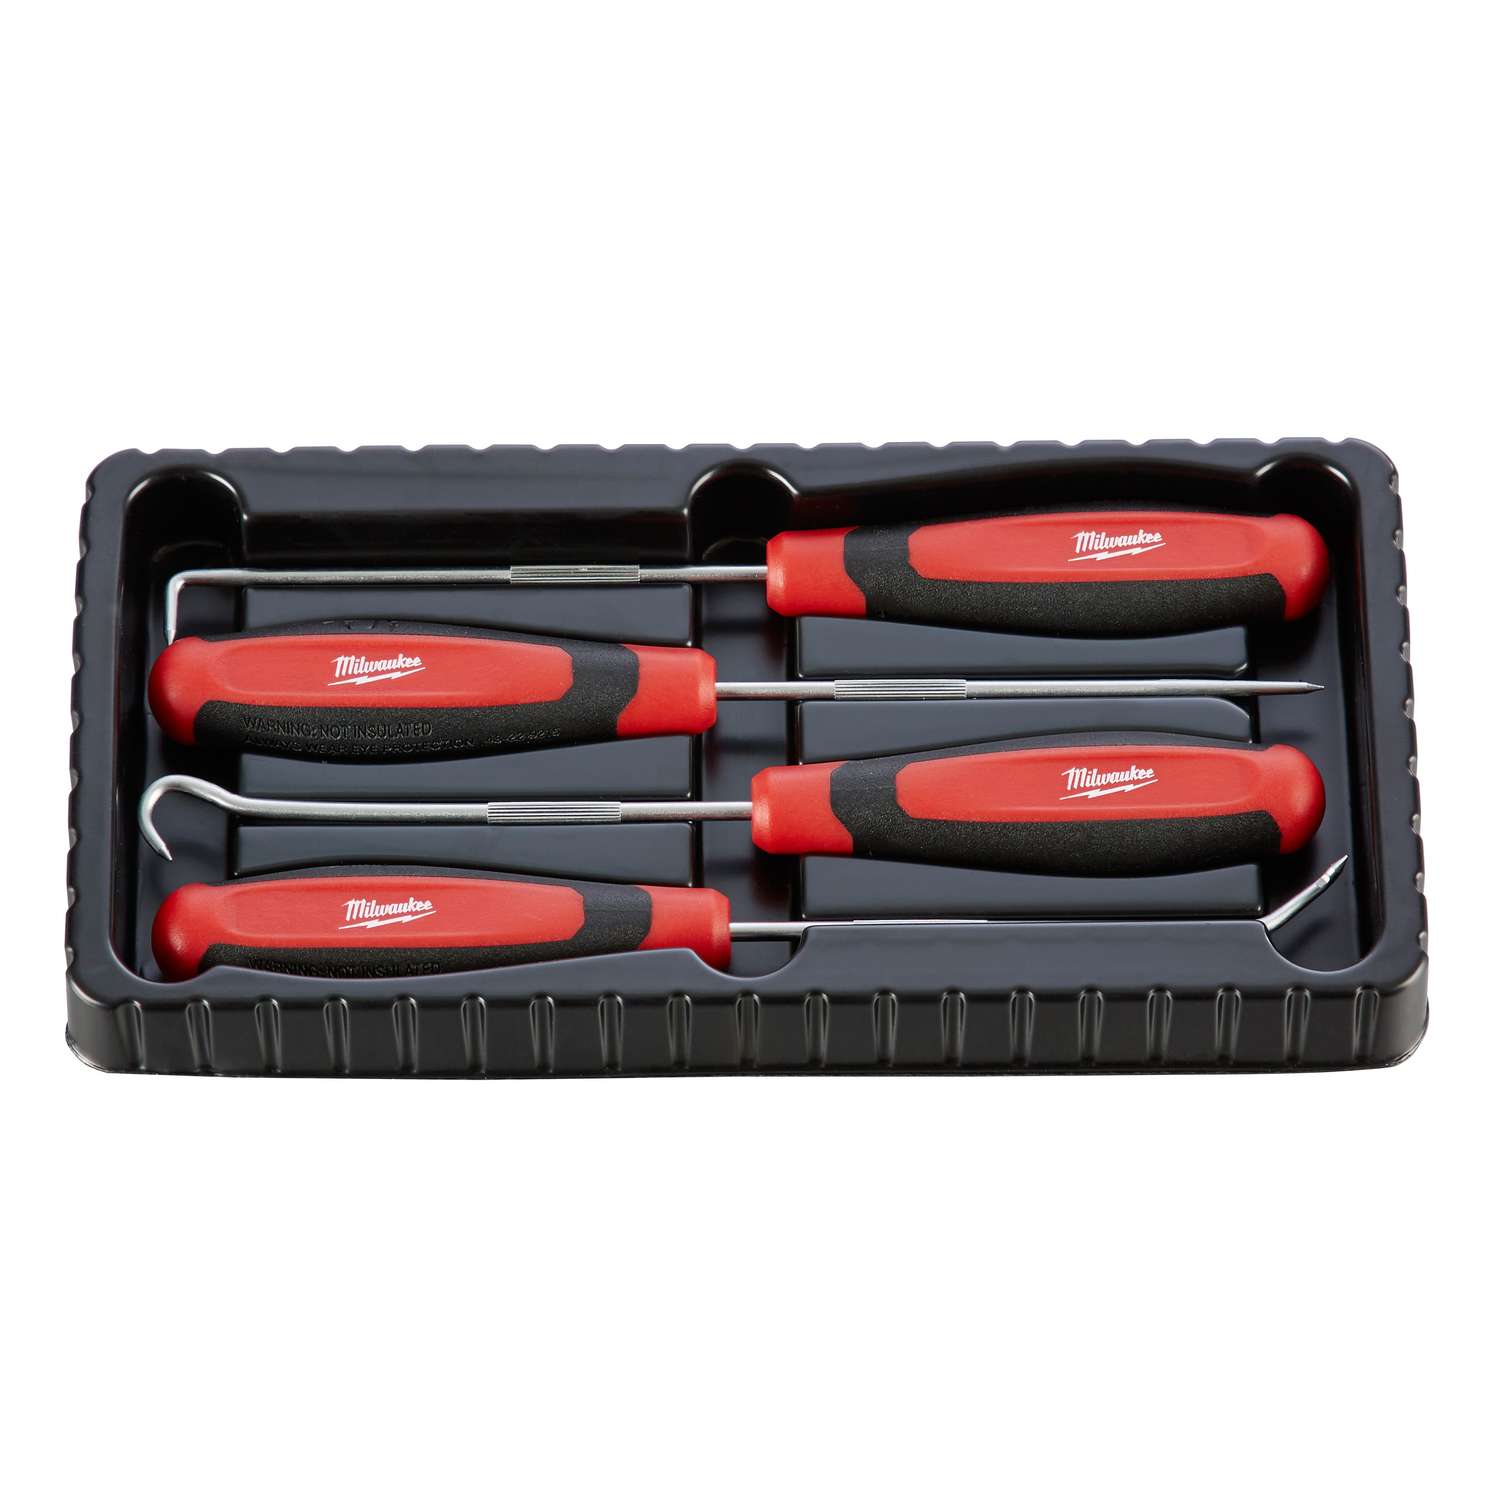 Precision Hook and Pick Tool Set (4-Piece)